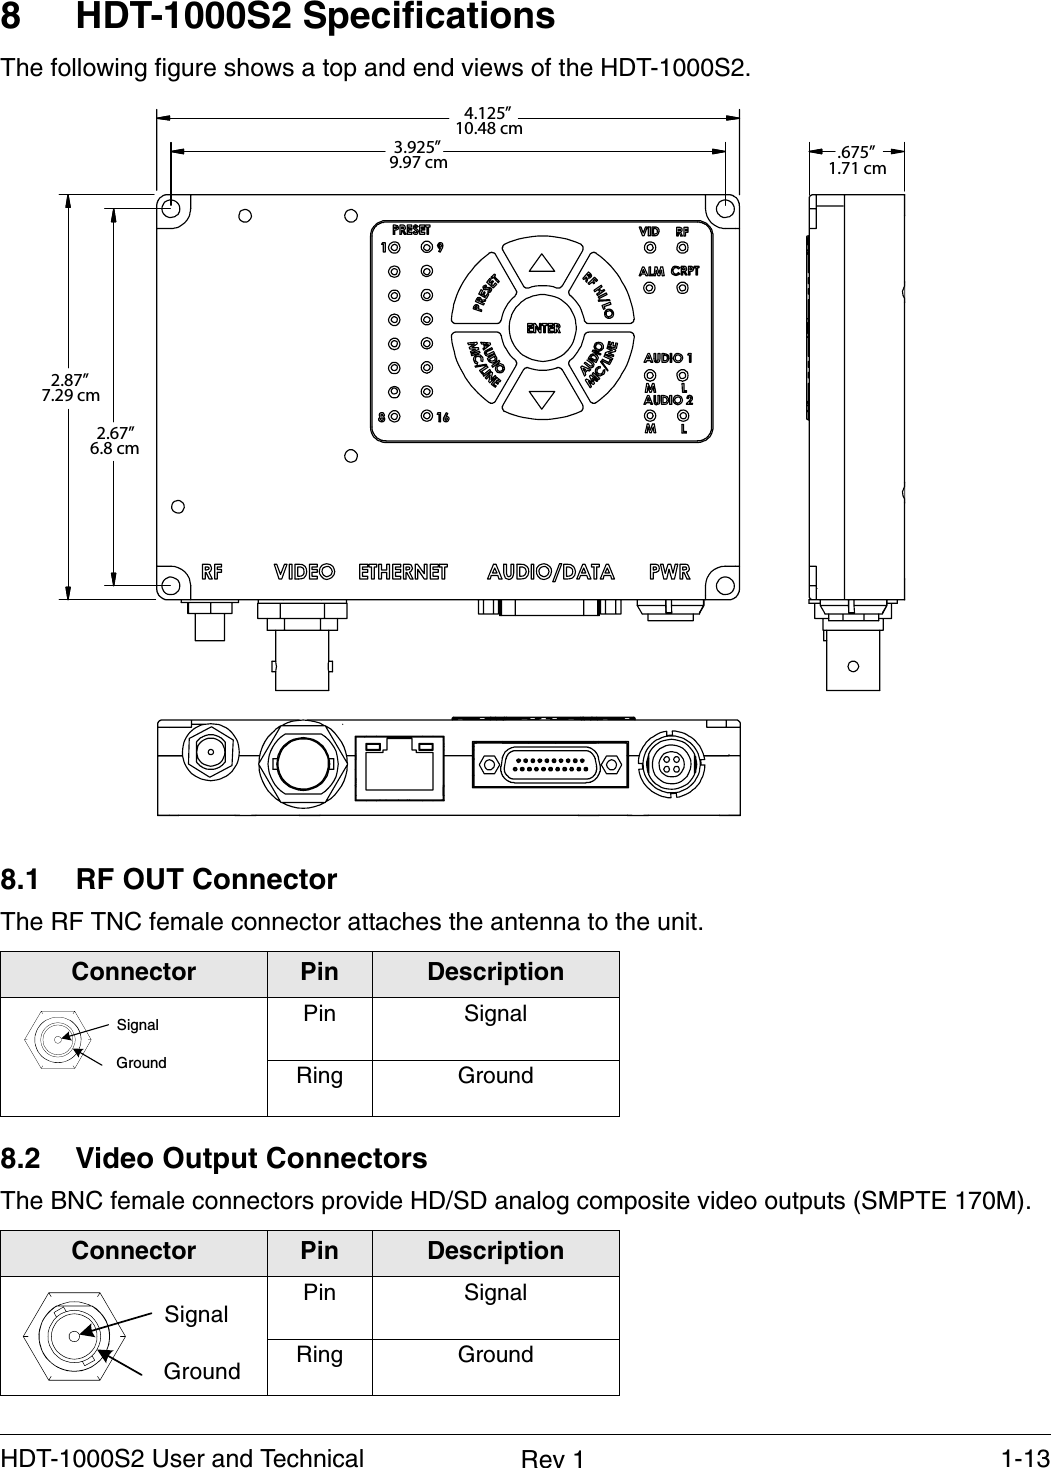    1-13HDT-1000S2 User and Technical  Rev 18 HDT-1000S2 SpecificationsThe following figure shows a top and end views of the HDT-1000S2.  8.1 RF OUT ConnectorThe RF TNC female connector attaches the antenna to the unit.8.2 Video Output ConnectorsThe BNC female connectors provide HD/SD analog composite video outputs (SMPTE 170M).Connector Pin DescriptionPin SignalRing GroundConnector Pin DescriptionPin SignalRing Ground4.125” 10.48 cm3.925” 9.97 cm .675” 1.71 cm2.87”7.29 cm2.67”6.8 cmSignalGroundSignalGround